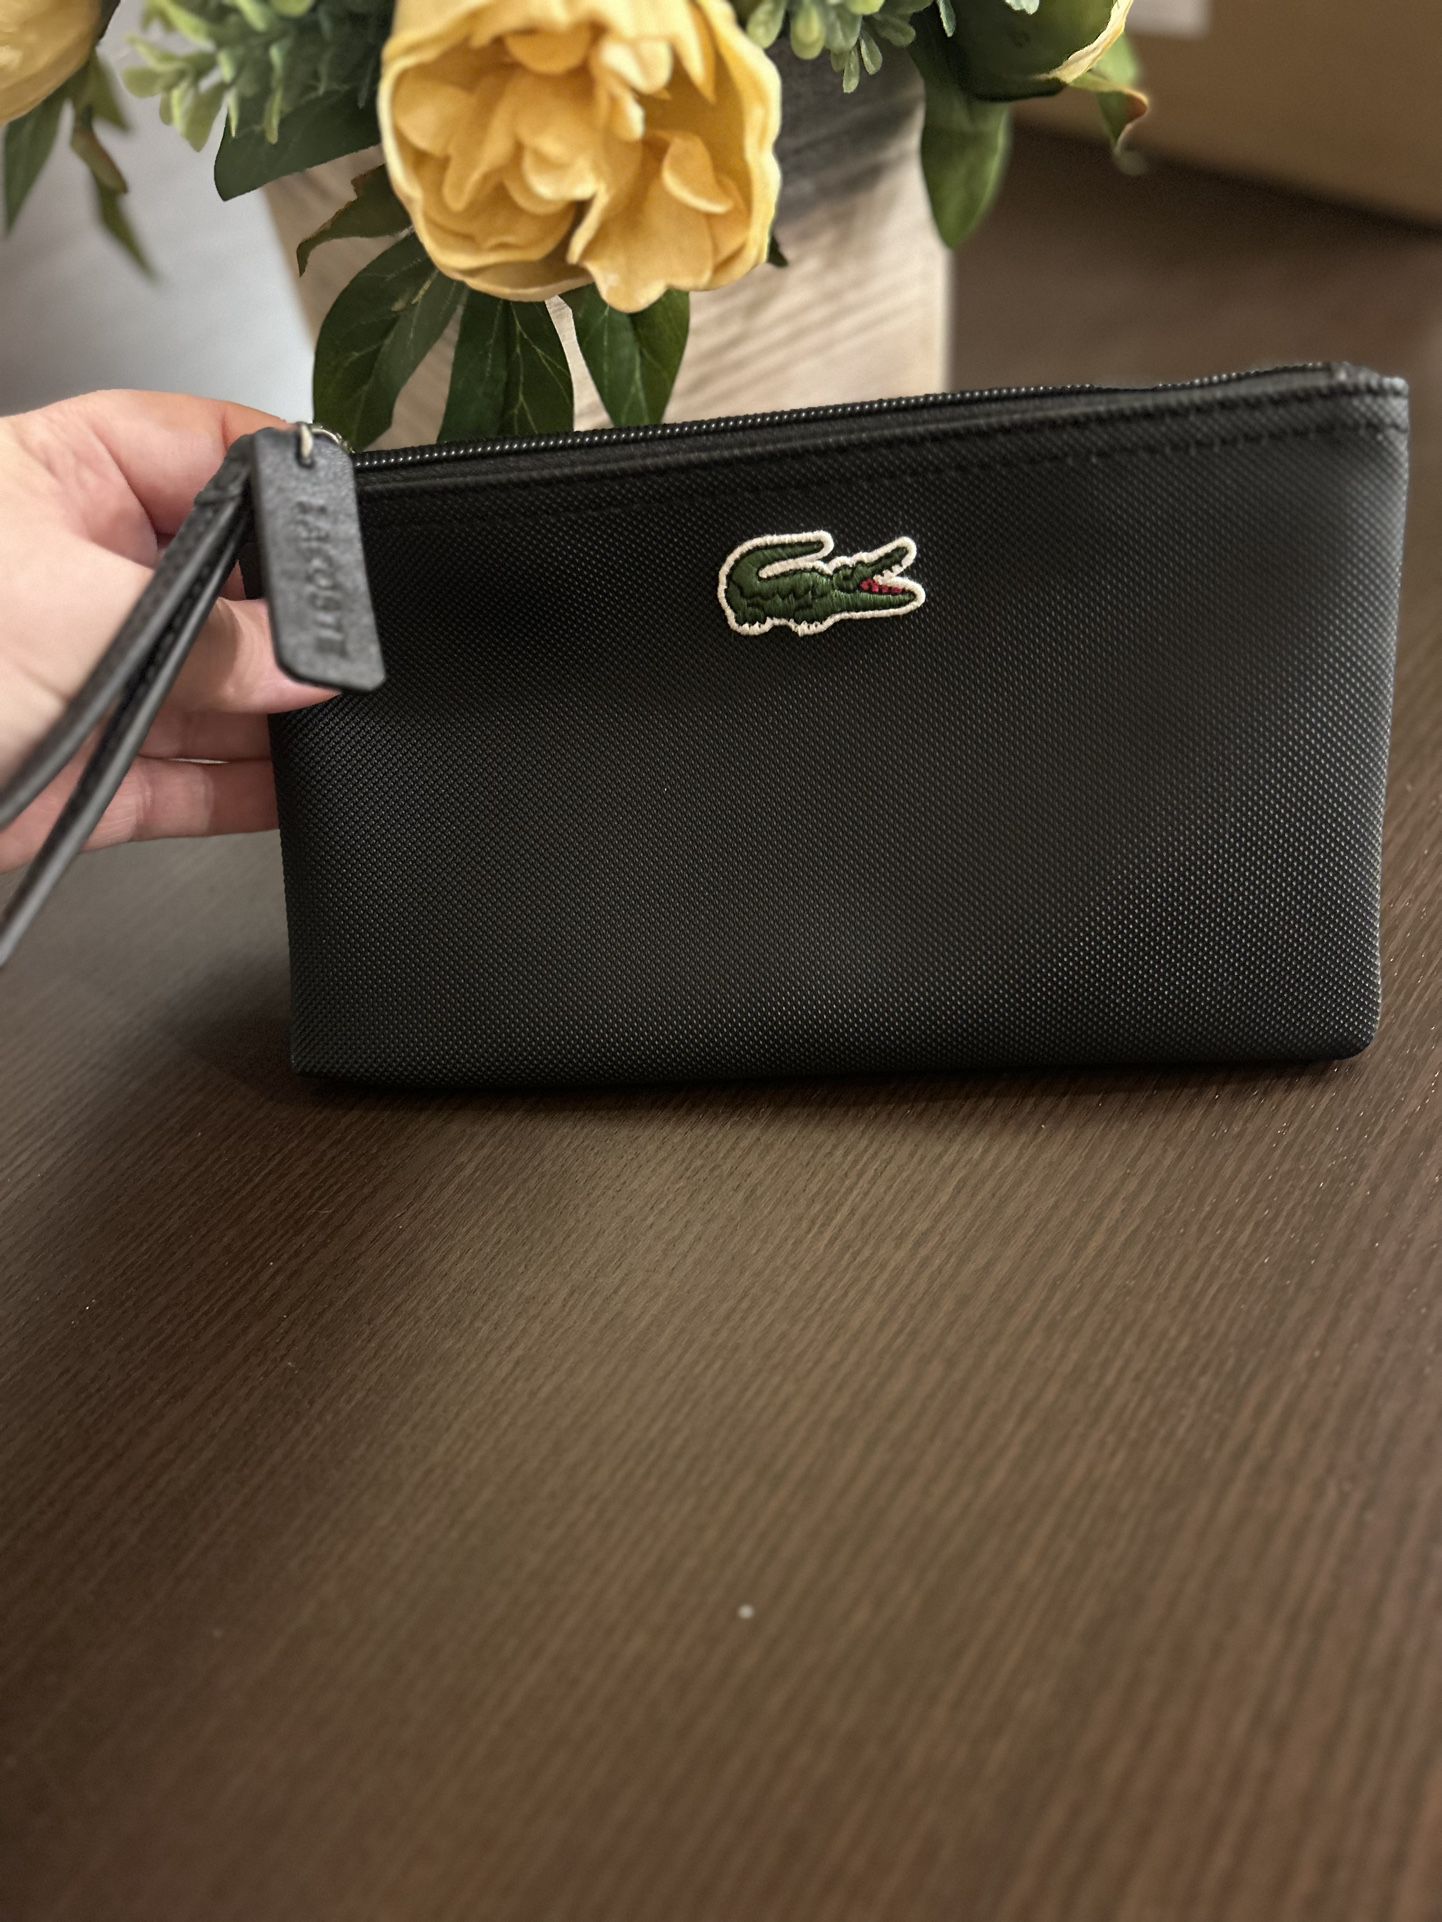 Price Is Firm!  New Never Used Lacoste Wristlet 8 1/2 Inches Wide By 5 Inches High Many Brand New Items In My Listings Cash Only